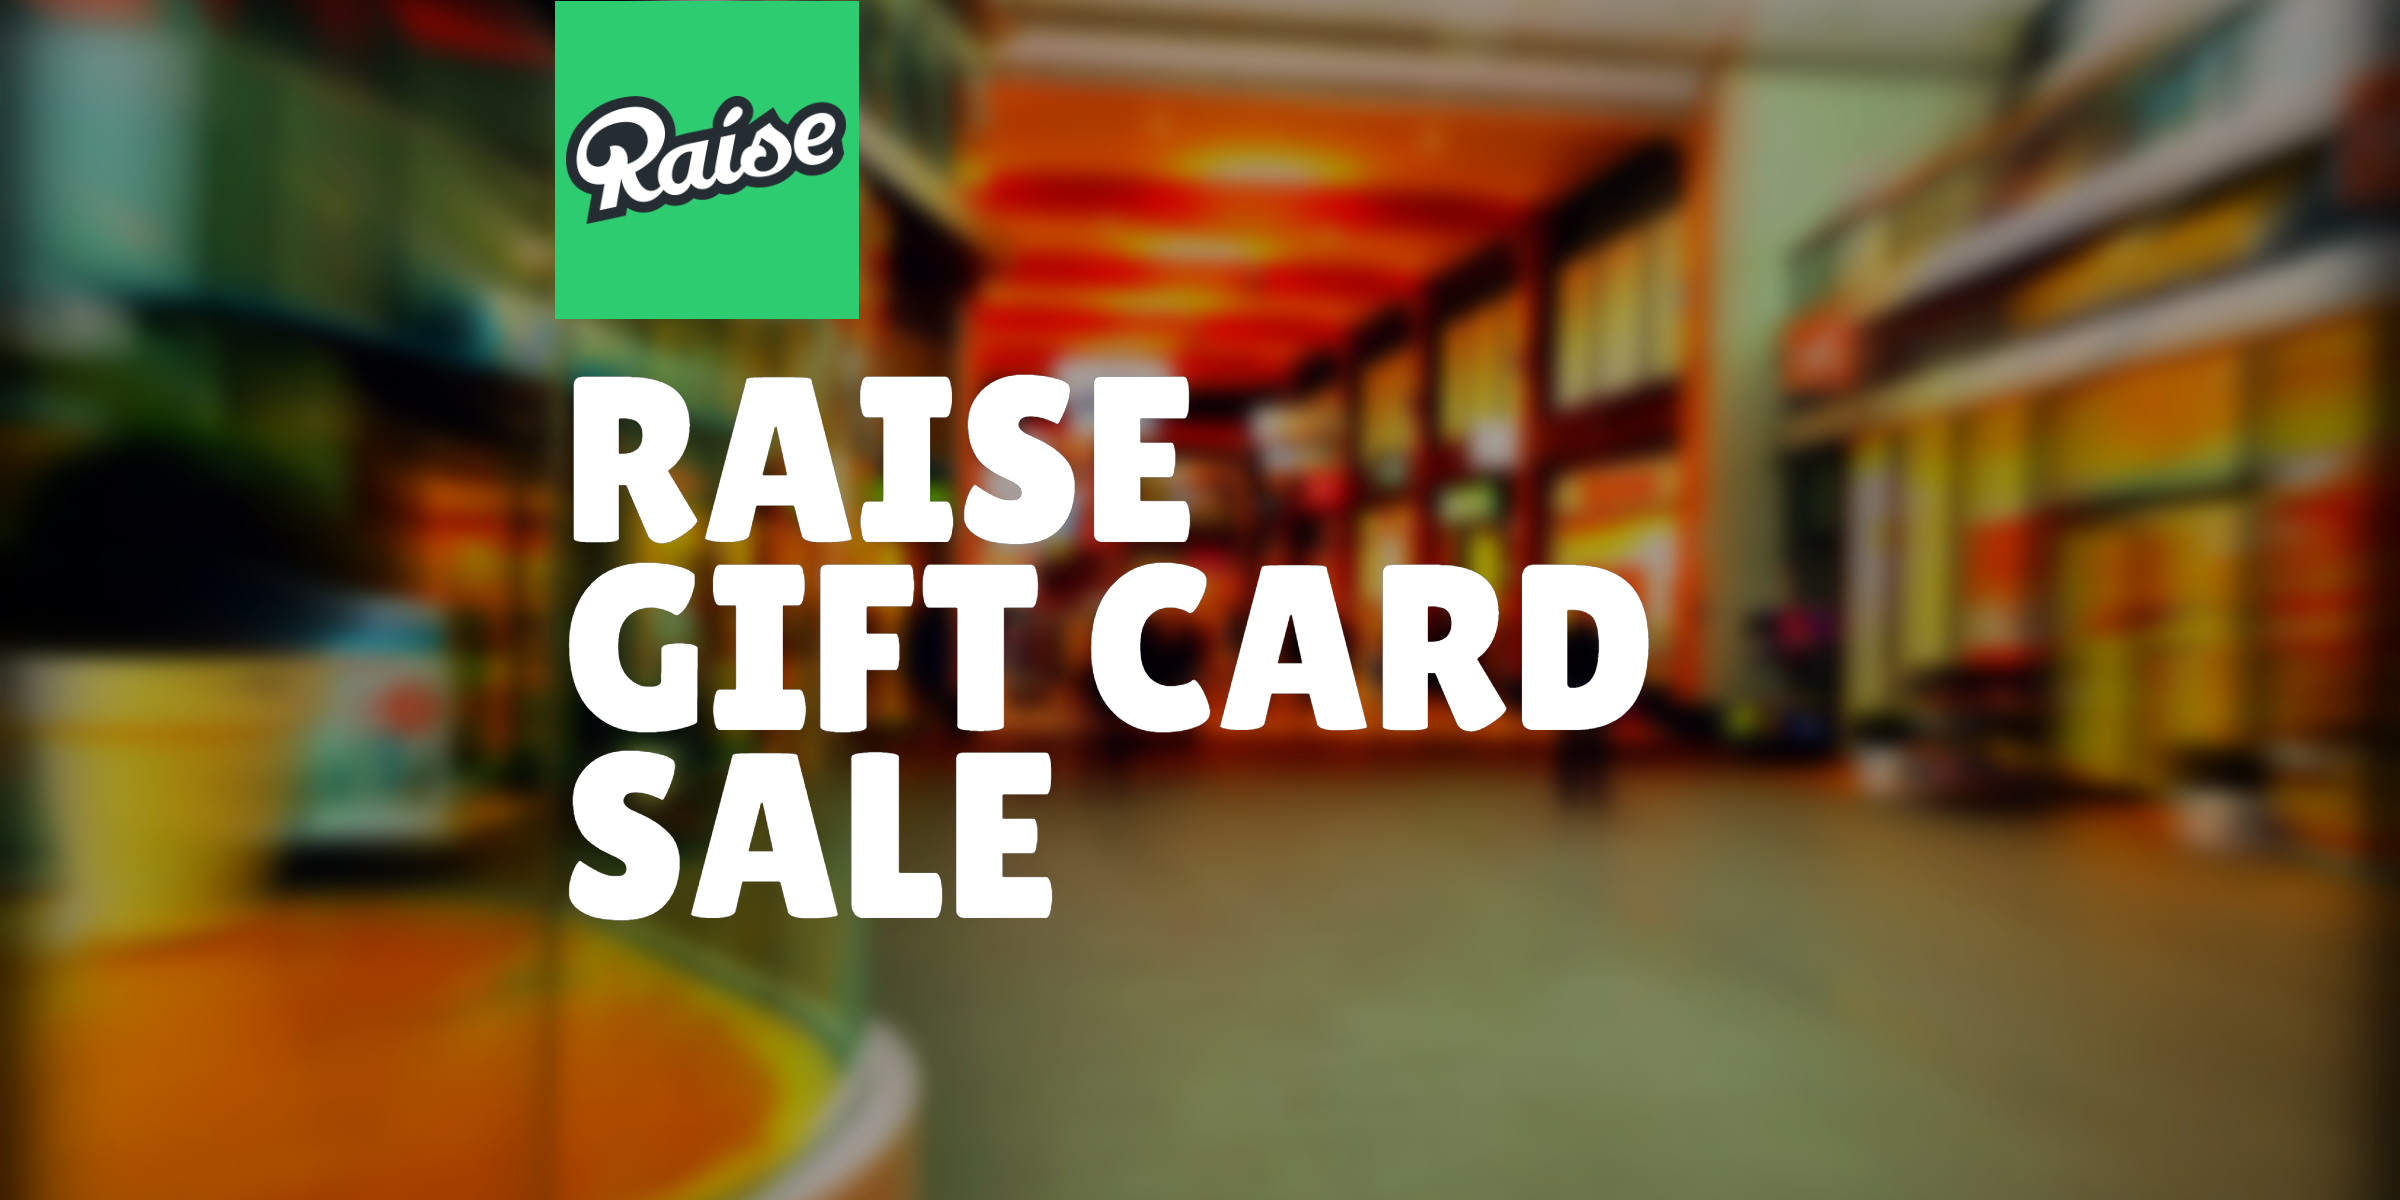 raise-site-wide-sale-5-off-all-gift-cards-this-weekend-miles-to